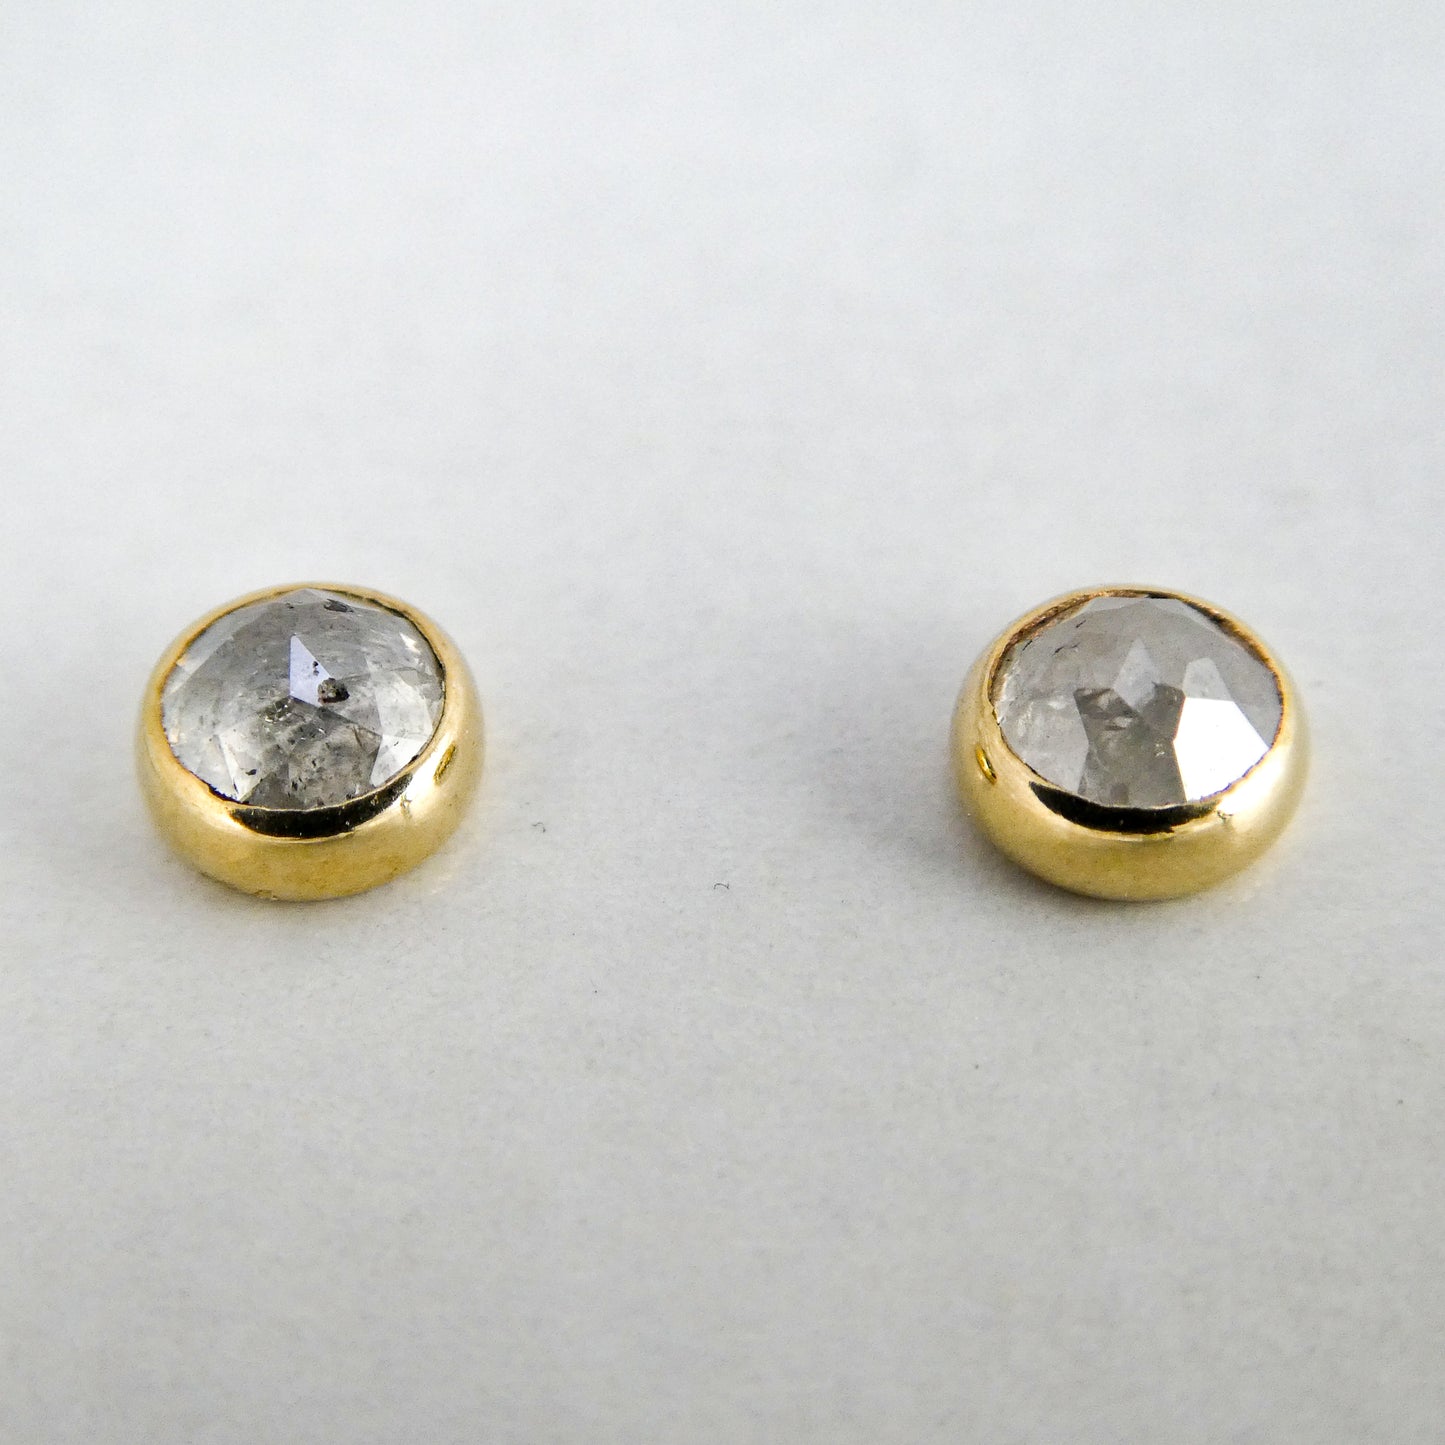 Ice White Rose-Cut Diamond Studs in 14k Yellow Gold Bezels, 0.64 carat and Ready to Ship